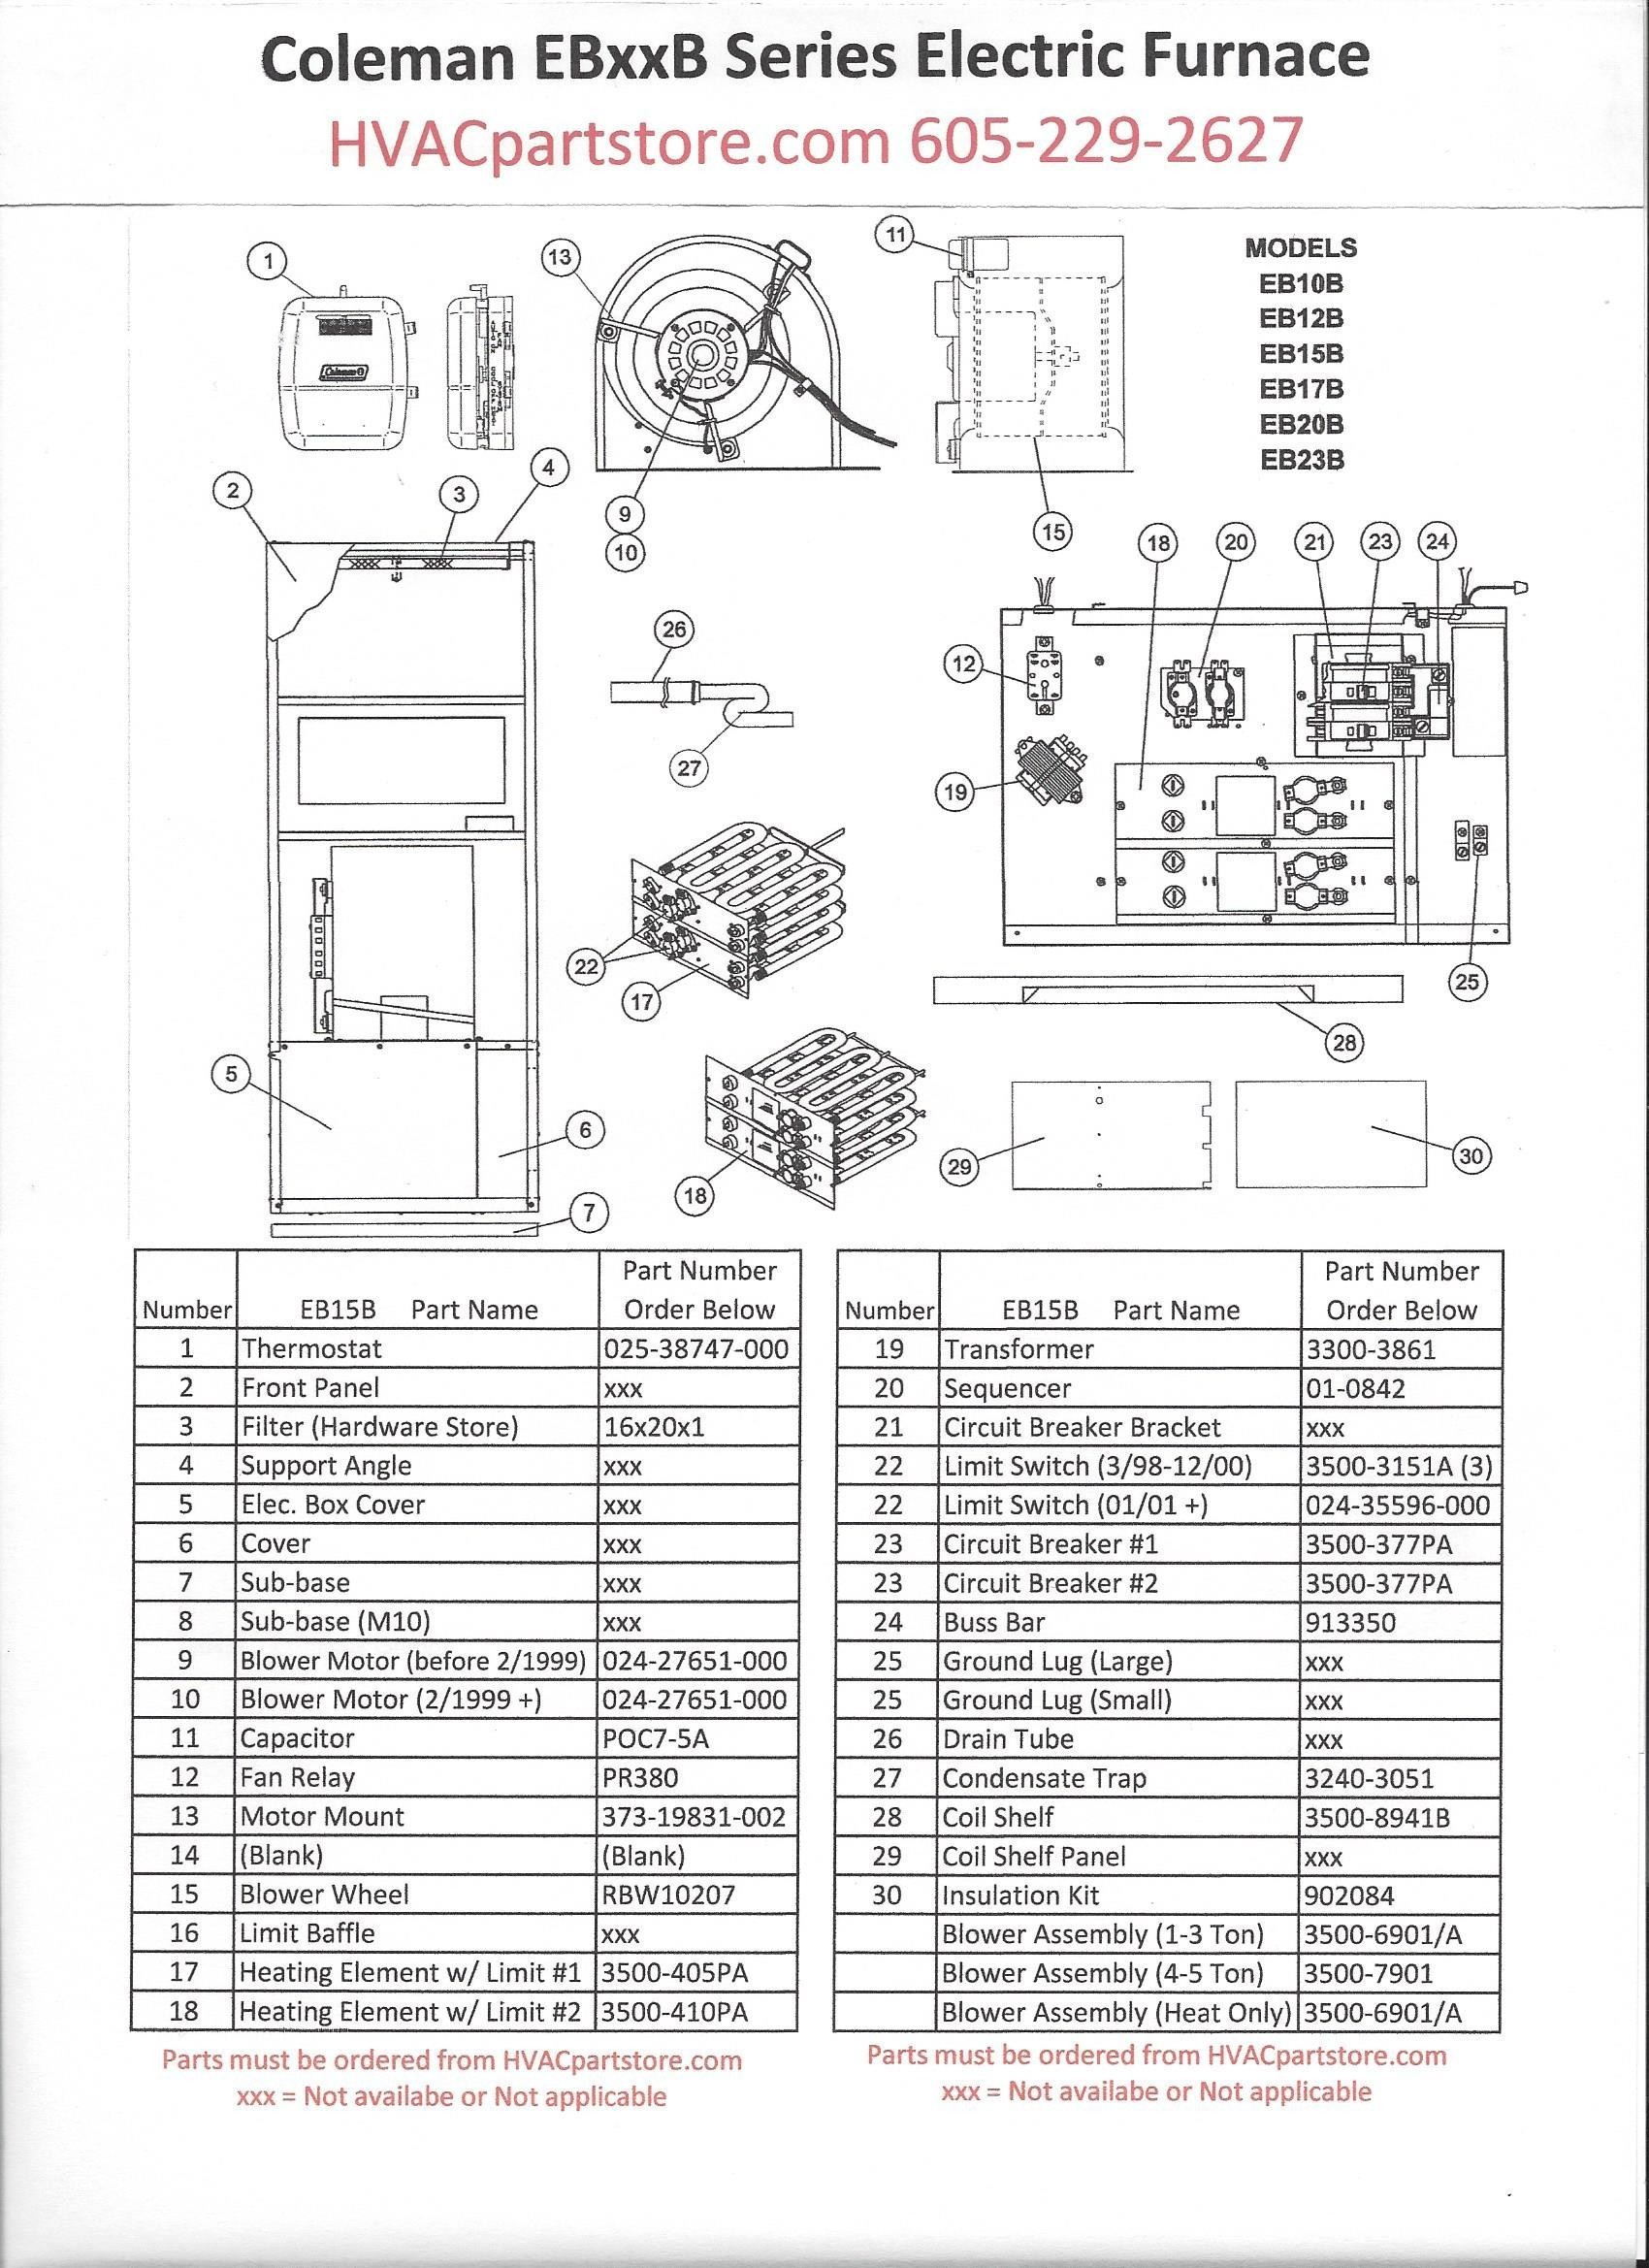 Wiring Diagram For Rv Electrical Valid Wiring Diagram Rv Trailer Fresh Wiring Diagram For Rv Furnace New